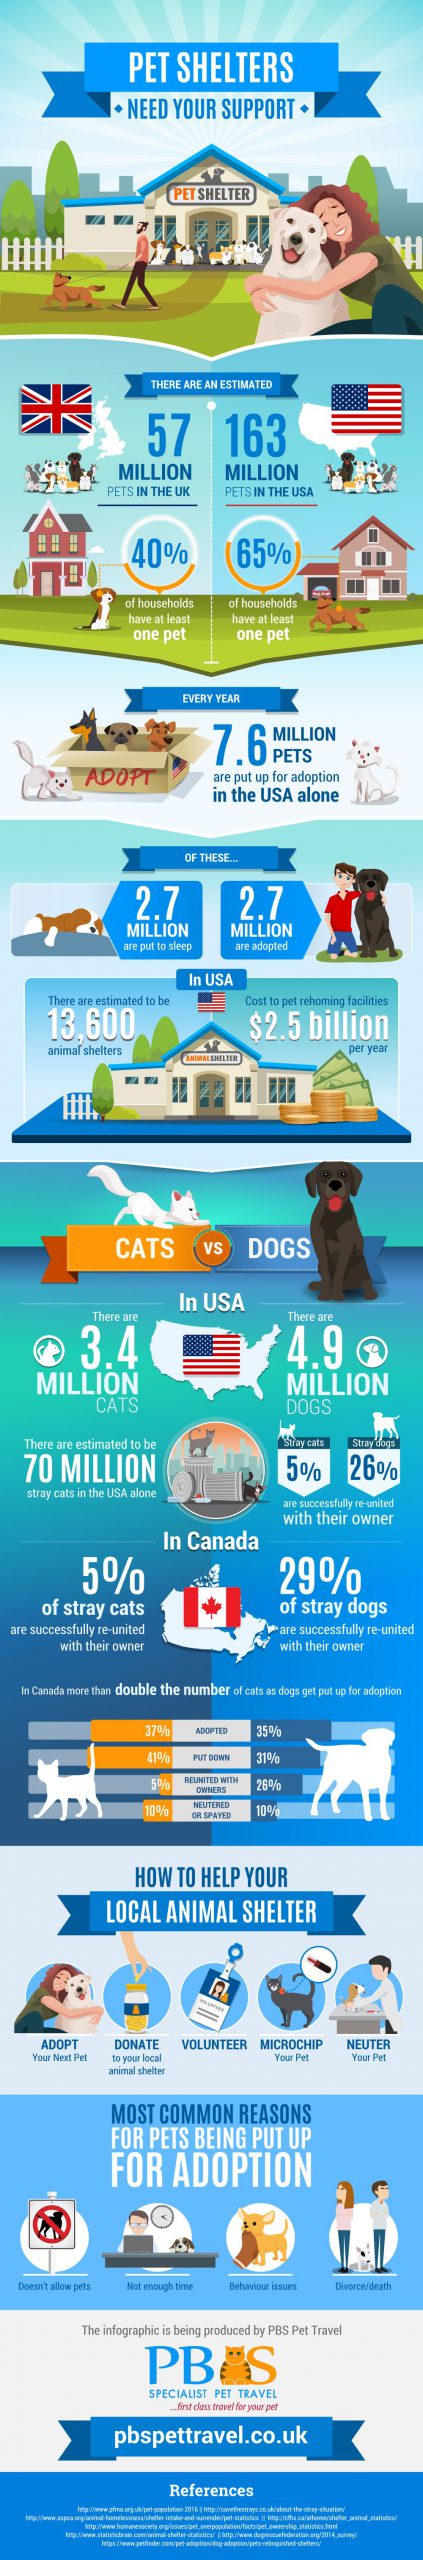 Discover the shocking pet rehoming statistics that every caring pet owner should know.